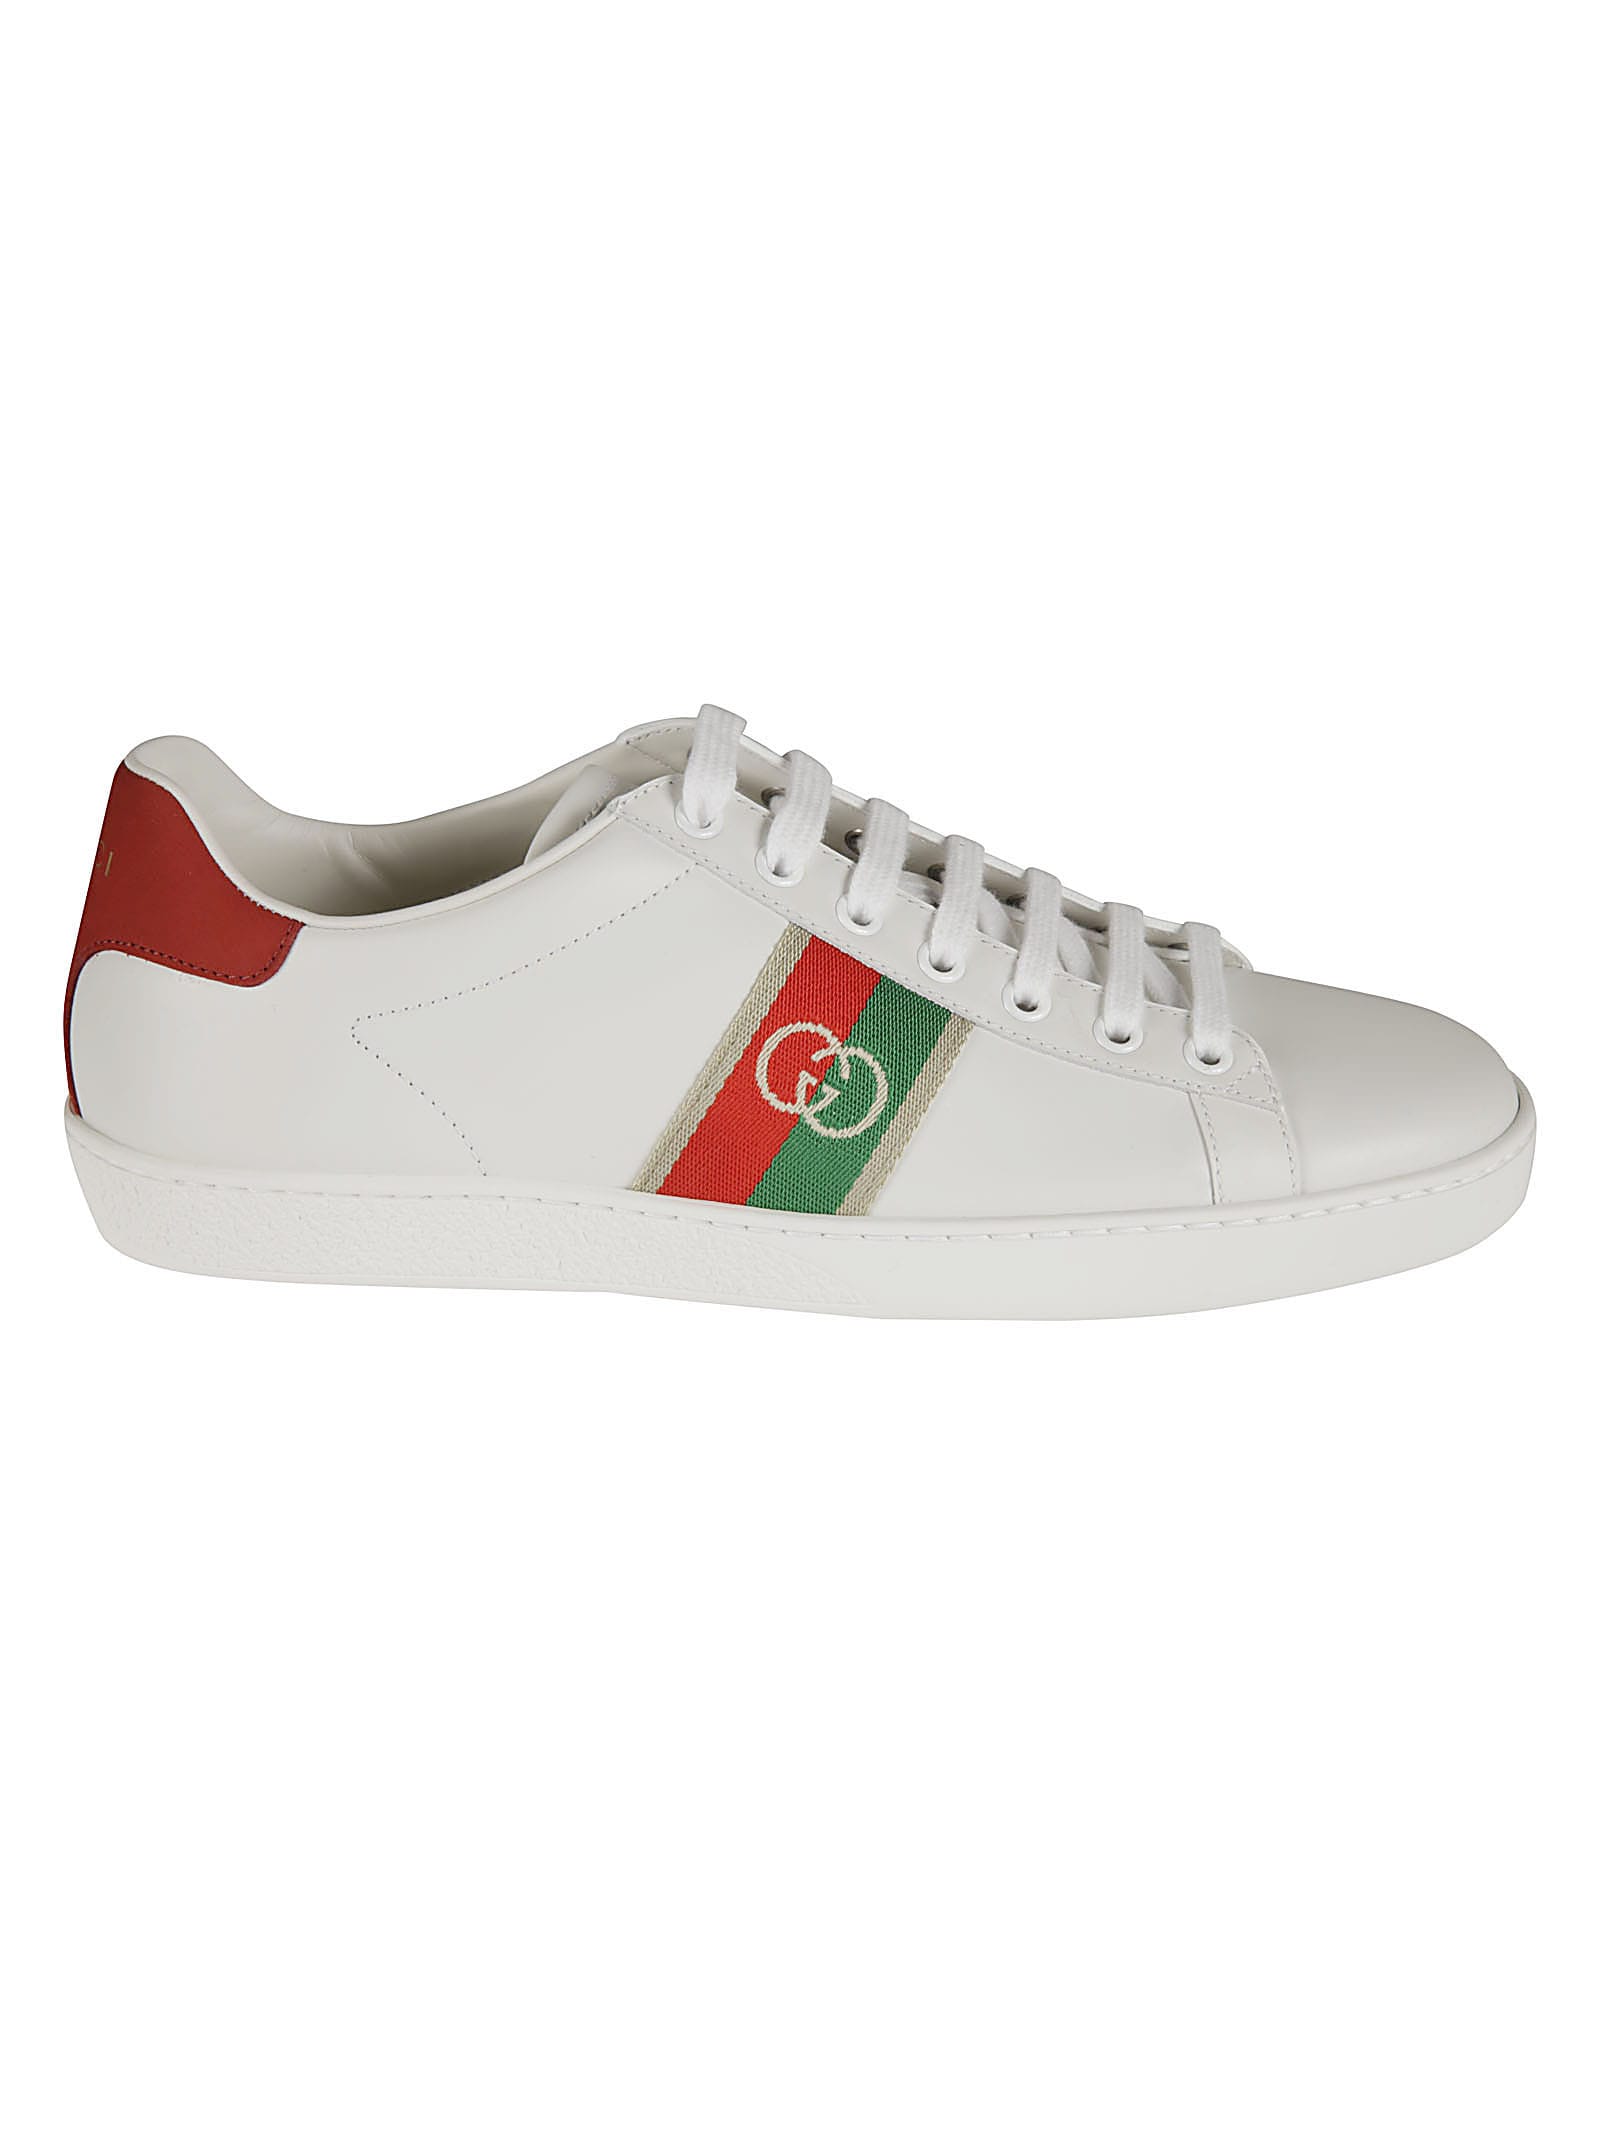 Gucci Signature Web Stripe Sided Sneakers